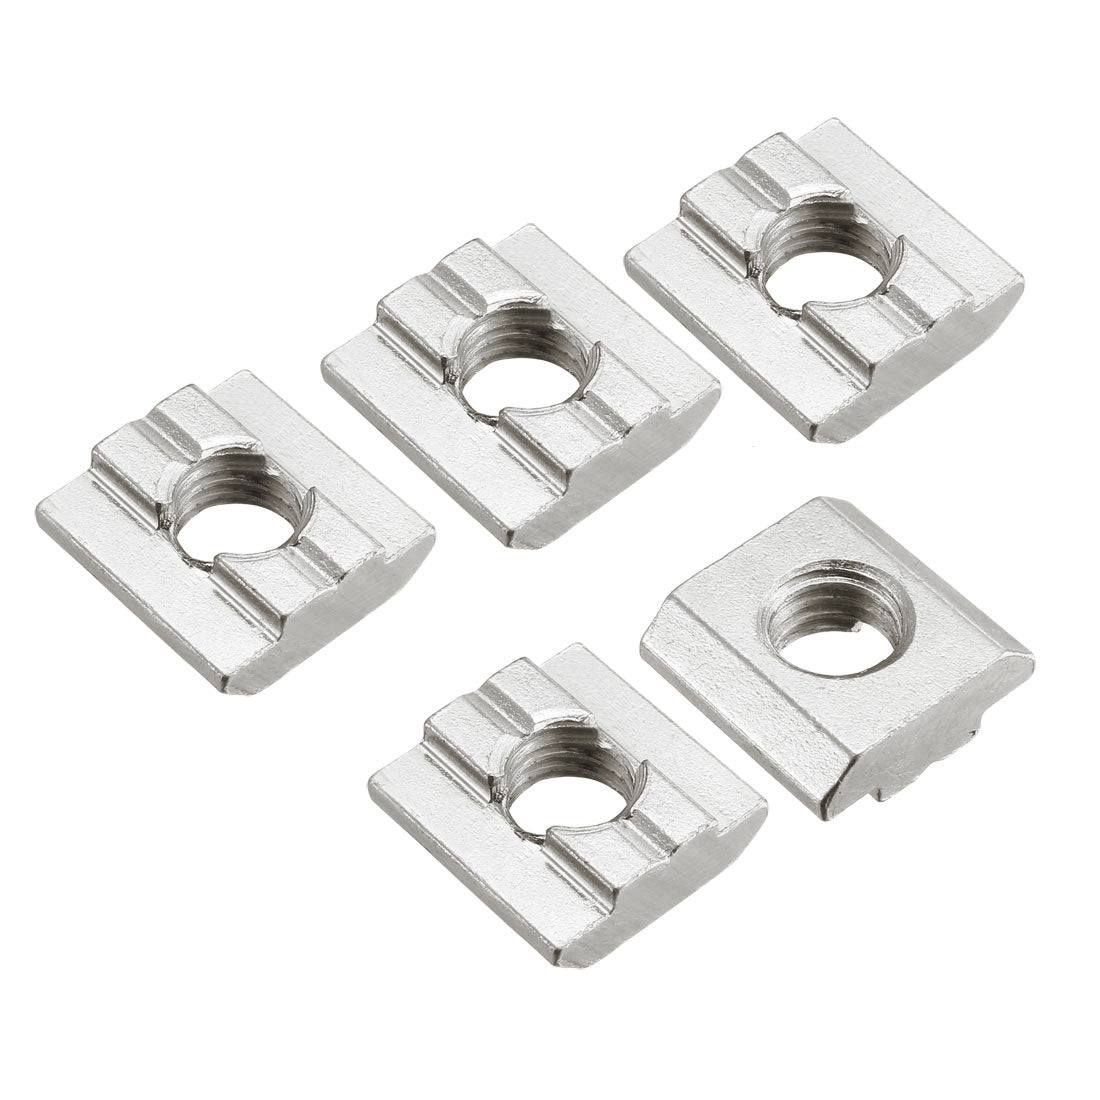 Uxcell Uxcell Slide in T-Nut, M8 Threaded for 3030 Series Aluminum Extrusions Profile 15pcs